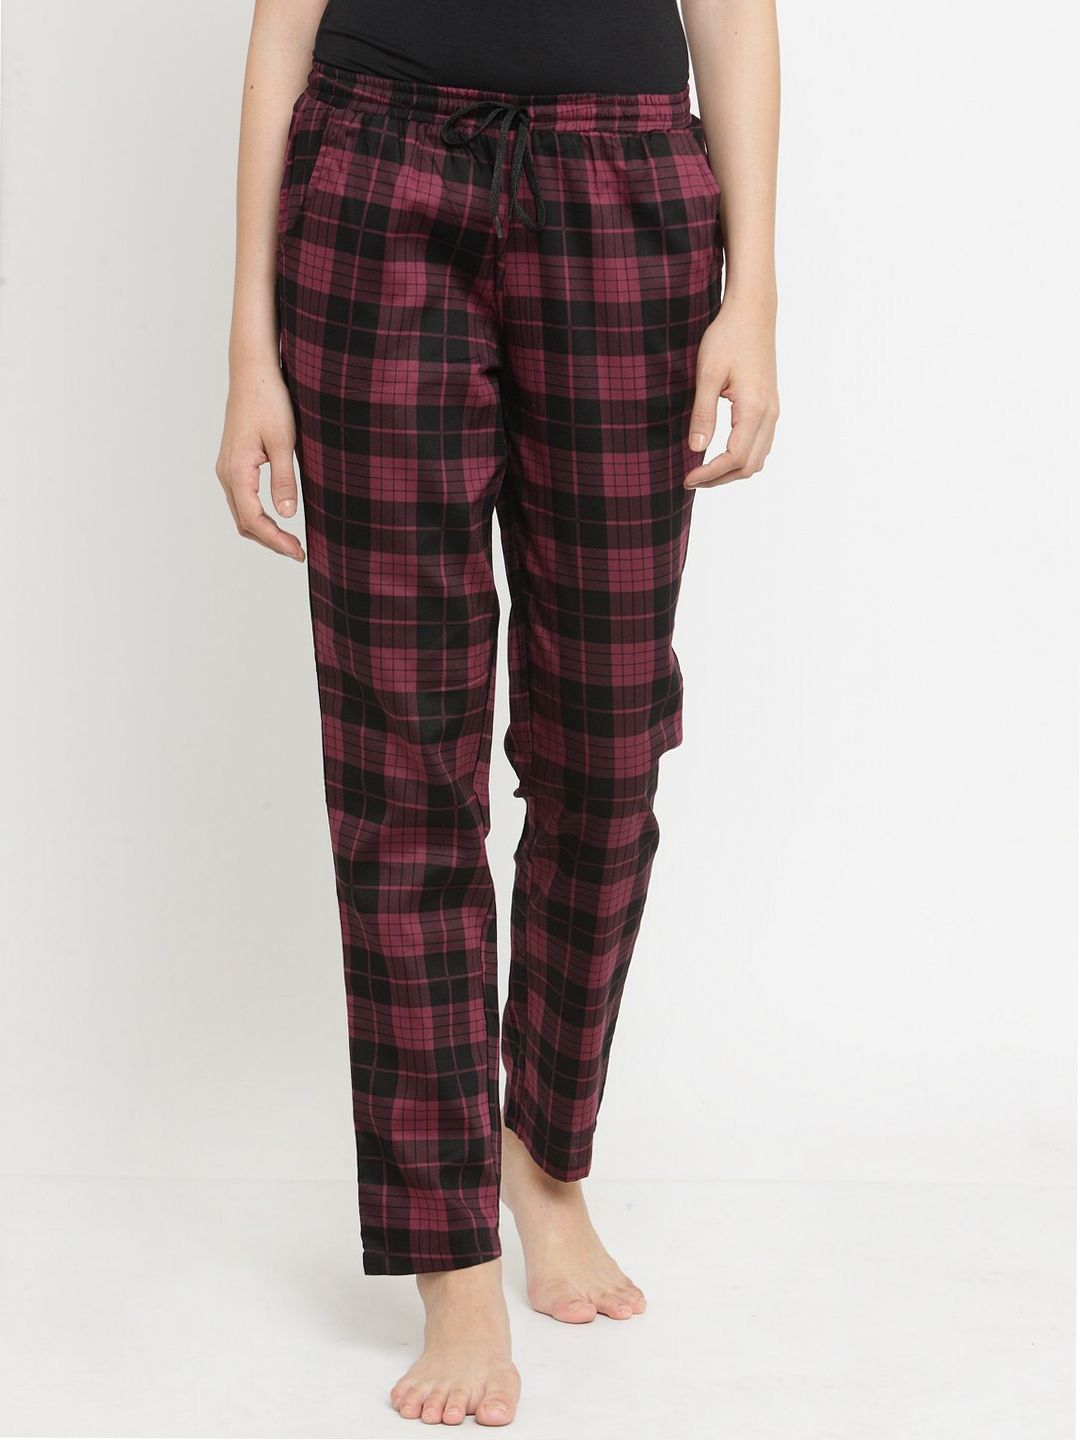 Claura Women Pink & Black Checked Lounge Pants Price in India